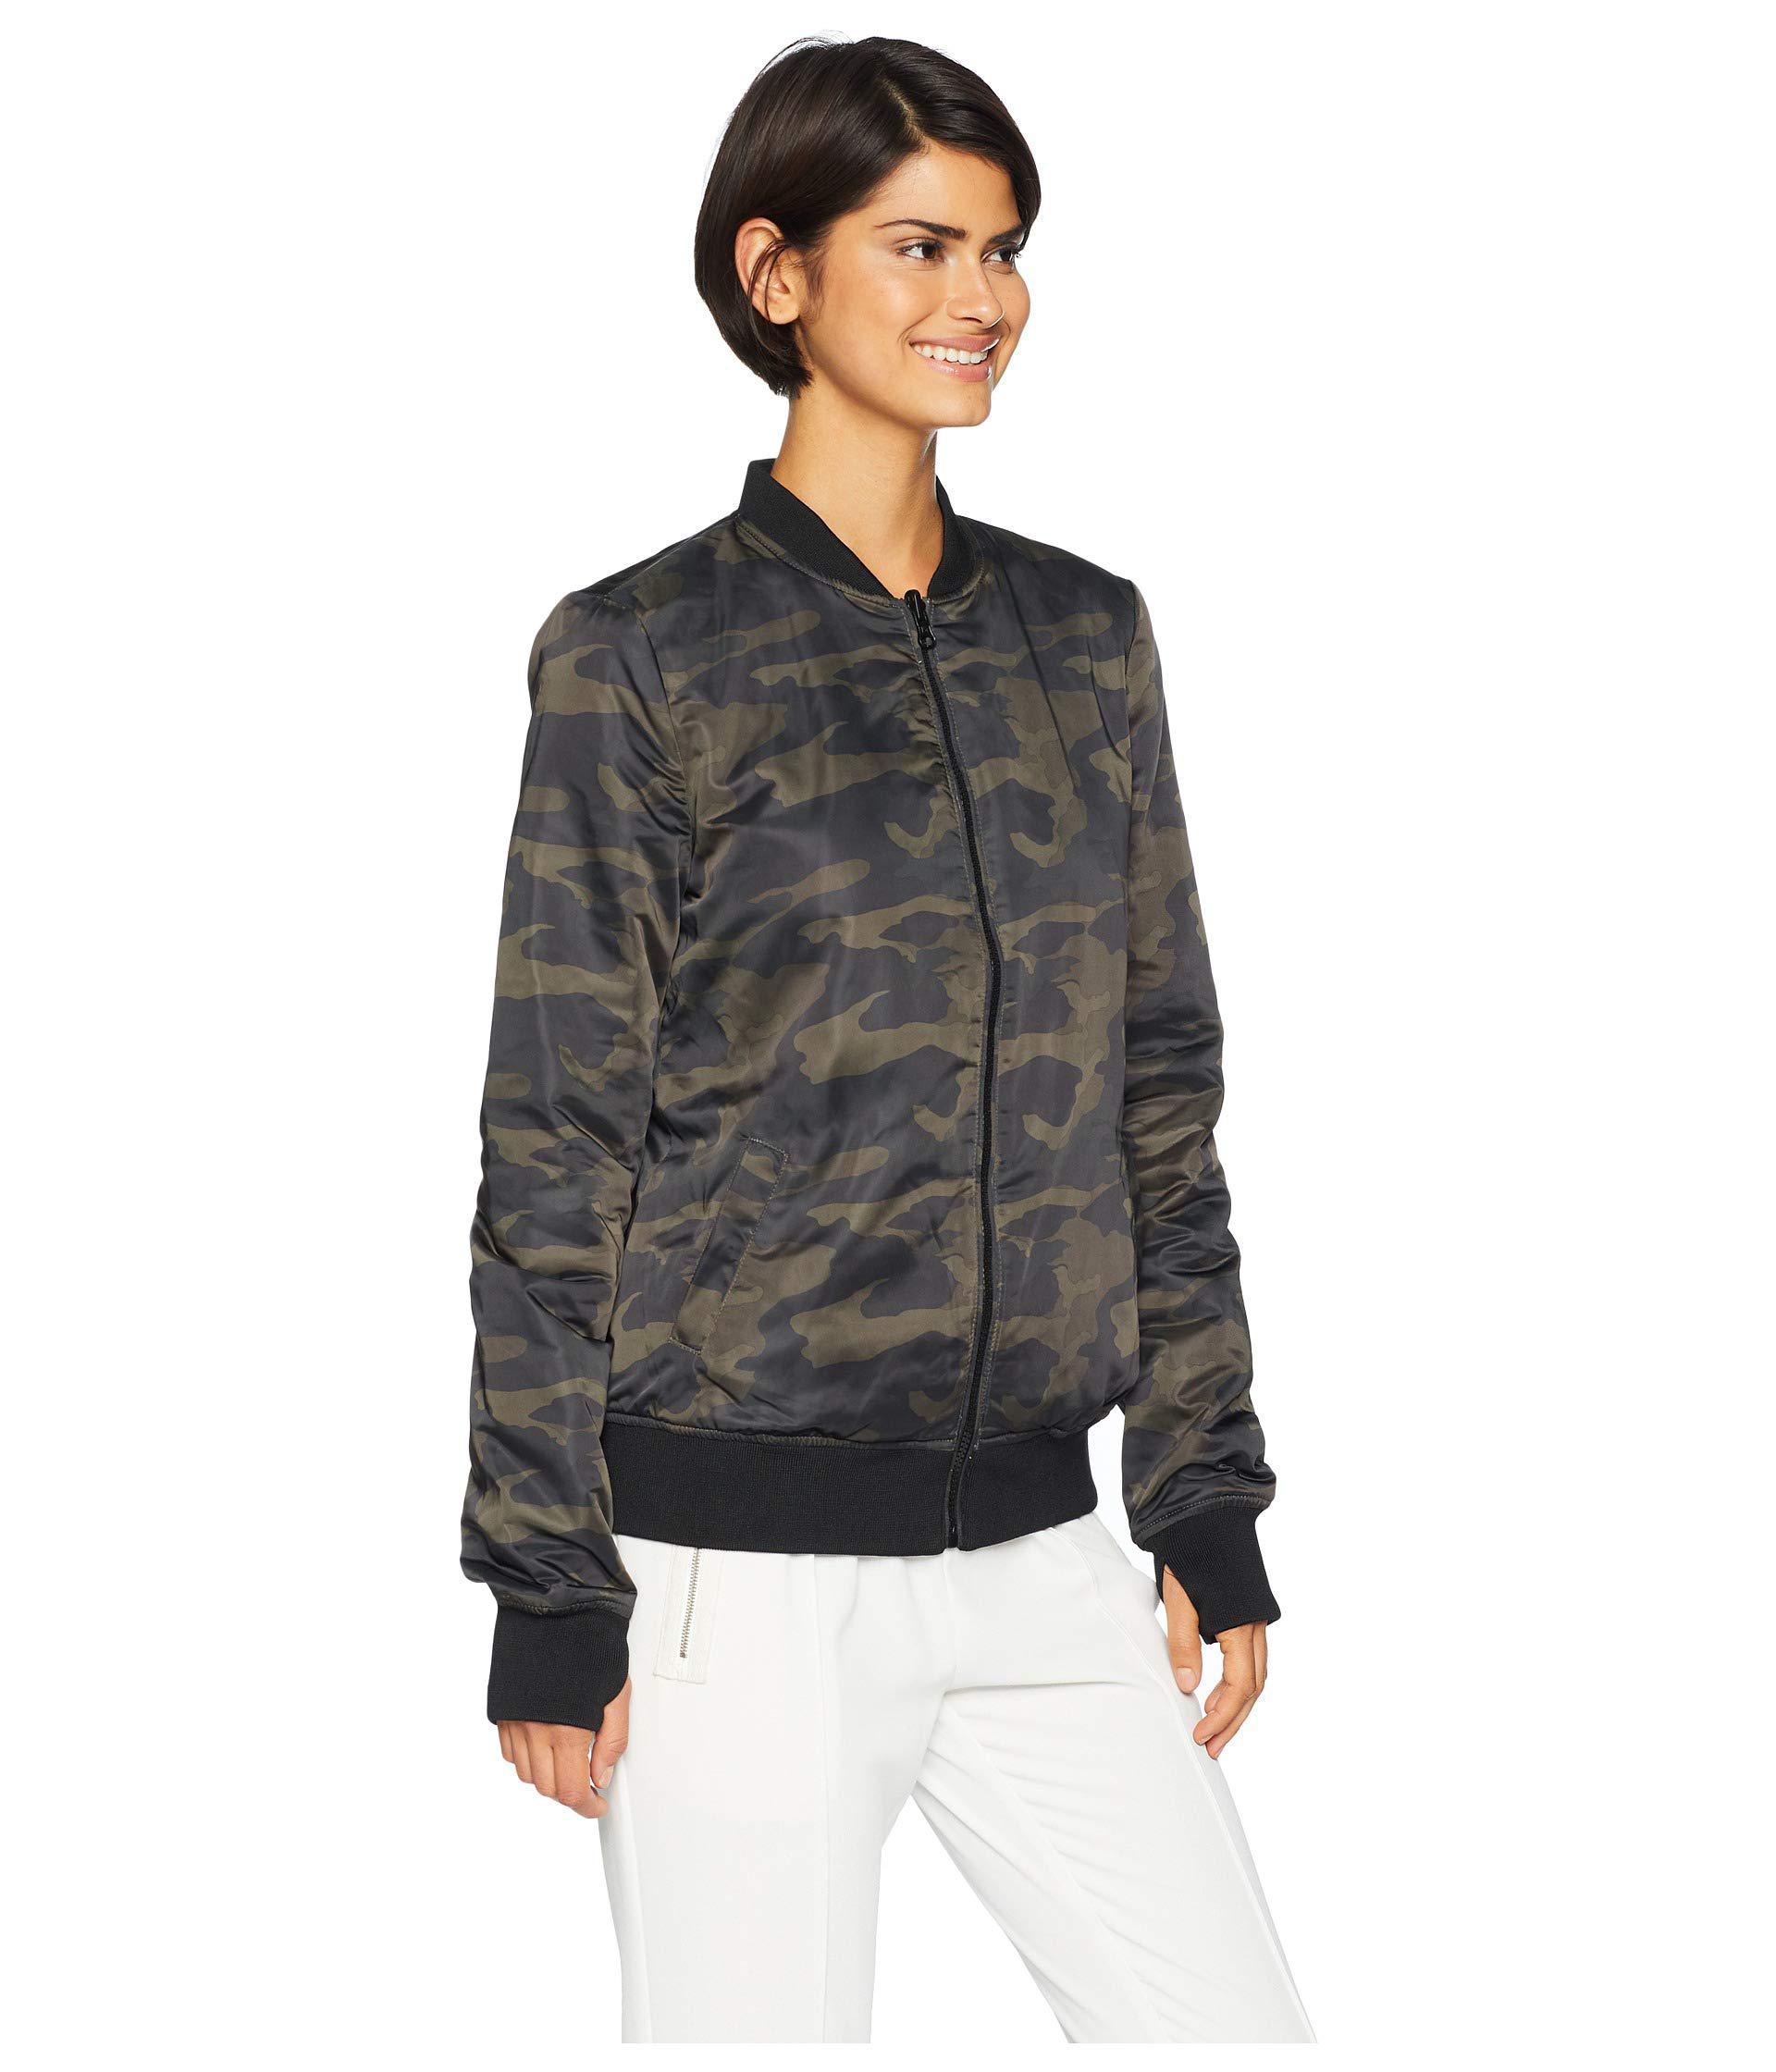 BLANC NOIR Synthetic Reversible Bomber Jacket in Camo/Taupe Grey (Gray) -  Lyst